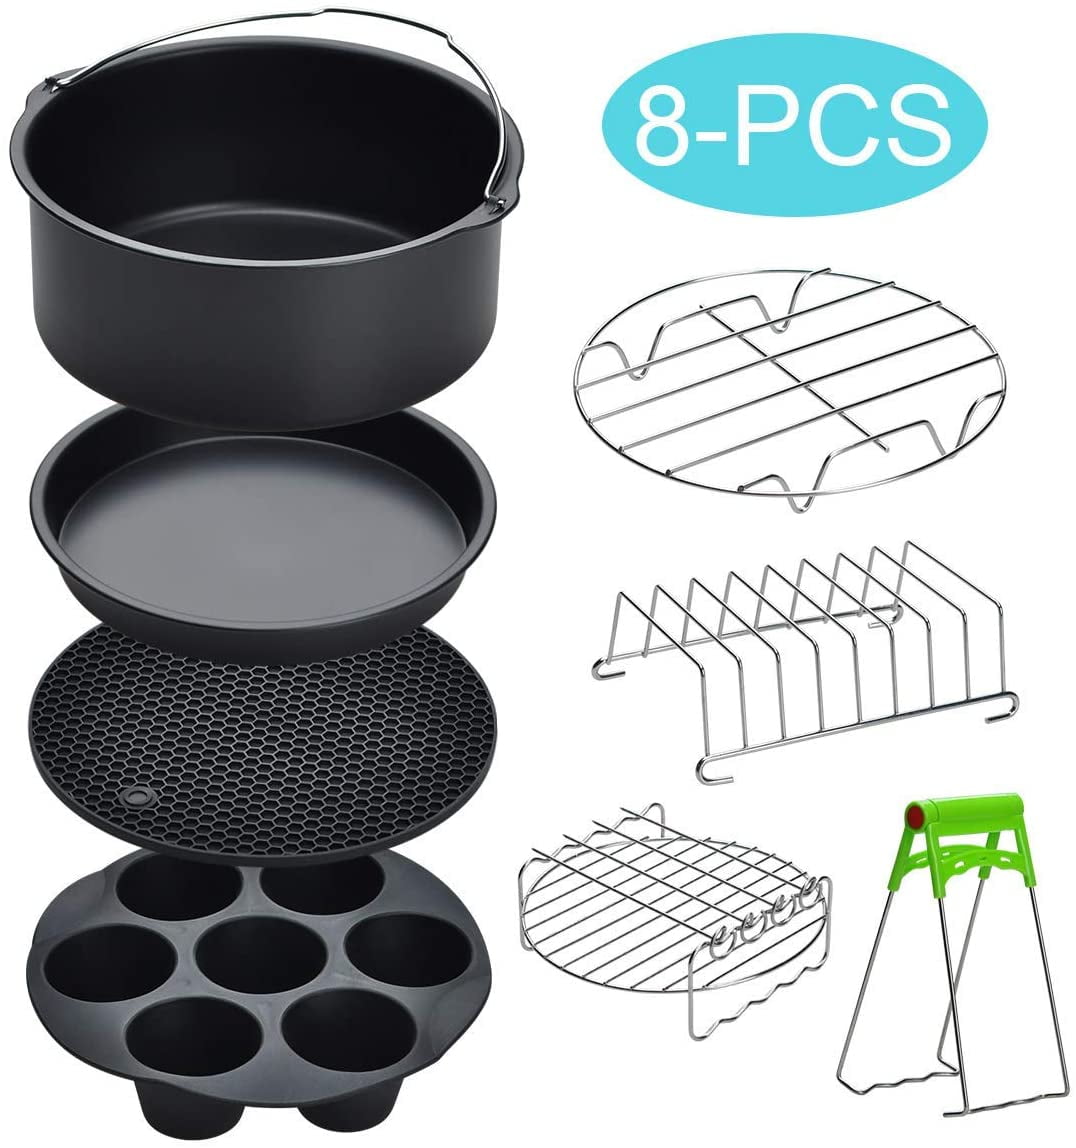 8pcs/set 7 Inch / 8 Inch Air Fryer Accessories for airfryer machine Fit